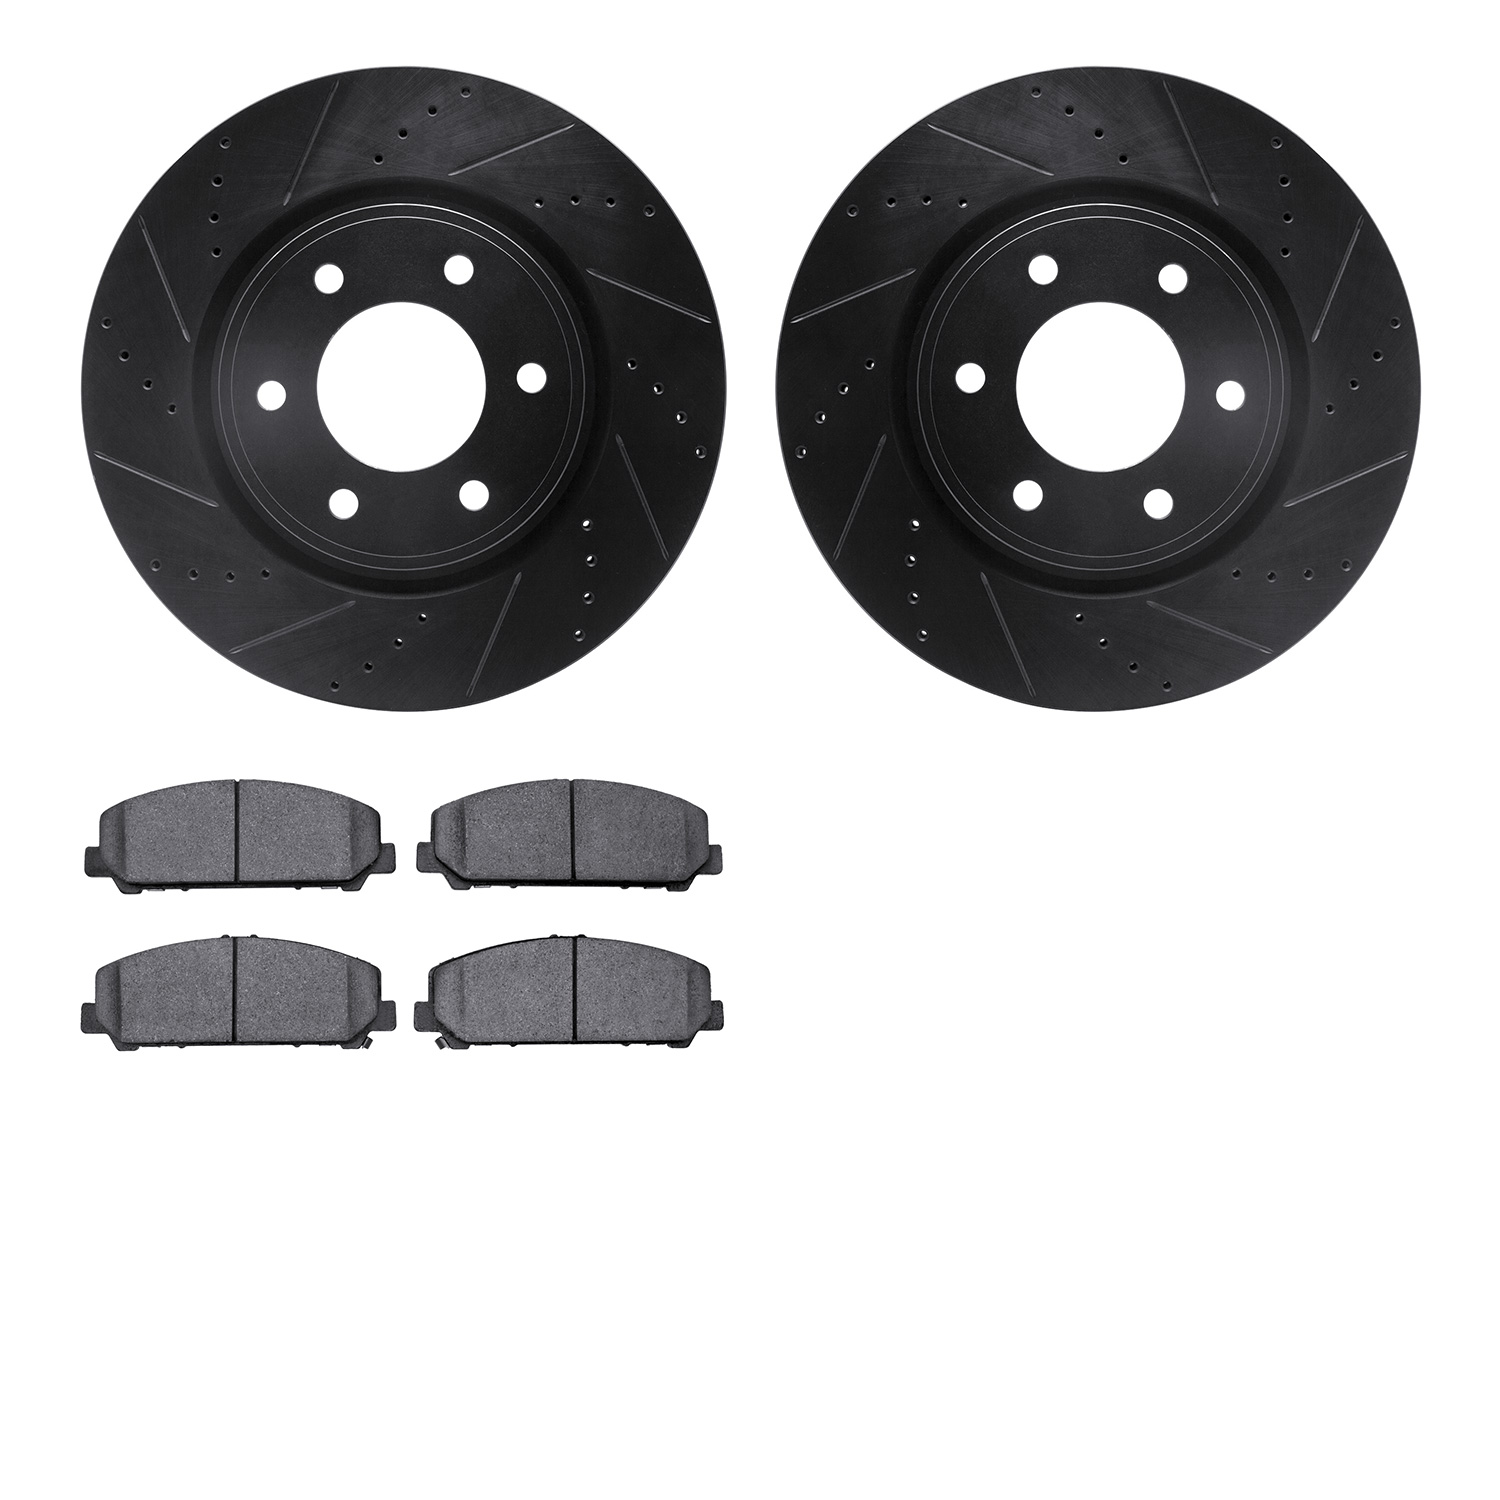 8402-68001 Drilled/Slotted Brake Rotors with Ultimate-Duty Brake Pads Kit [Black], Fits Select Infiniti/Nissan, Position: Front